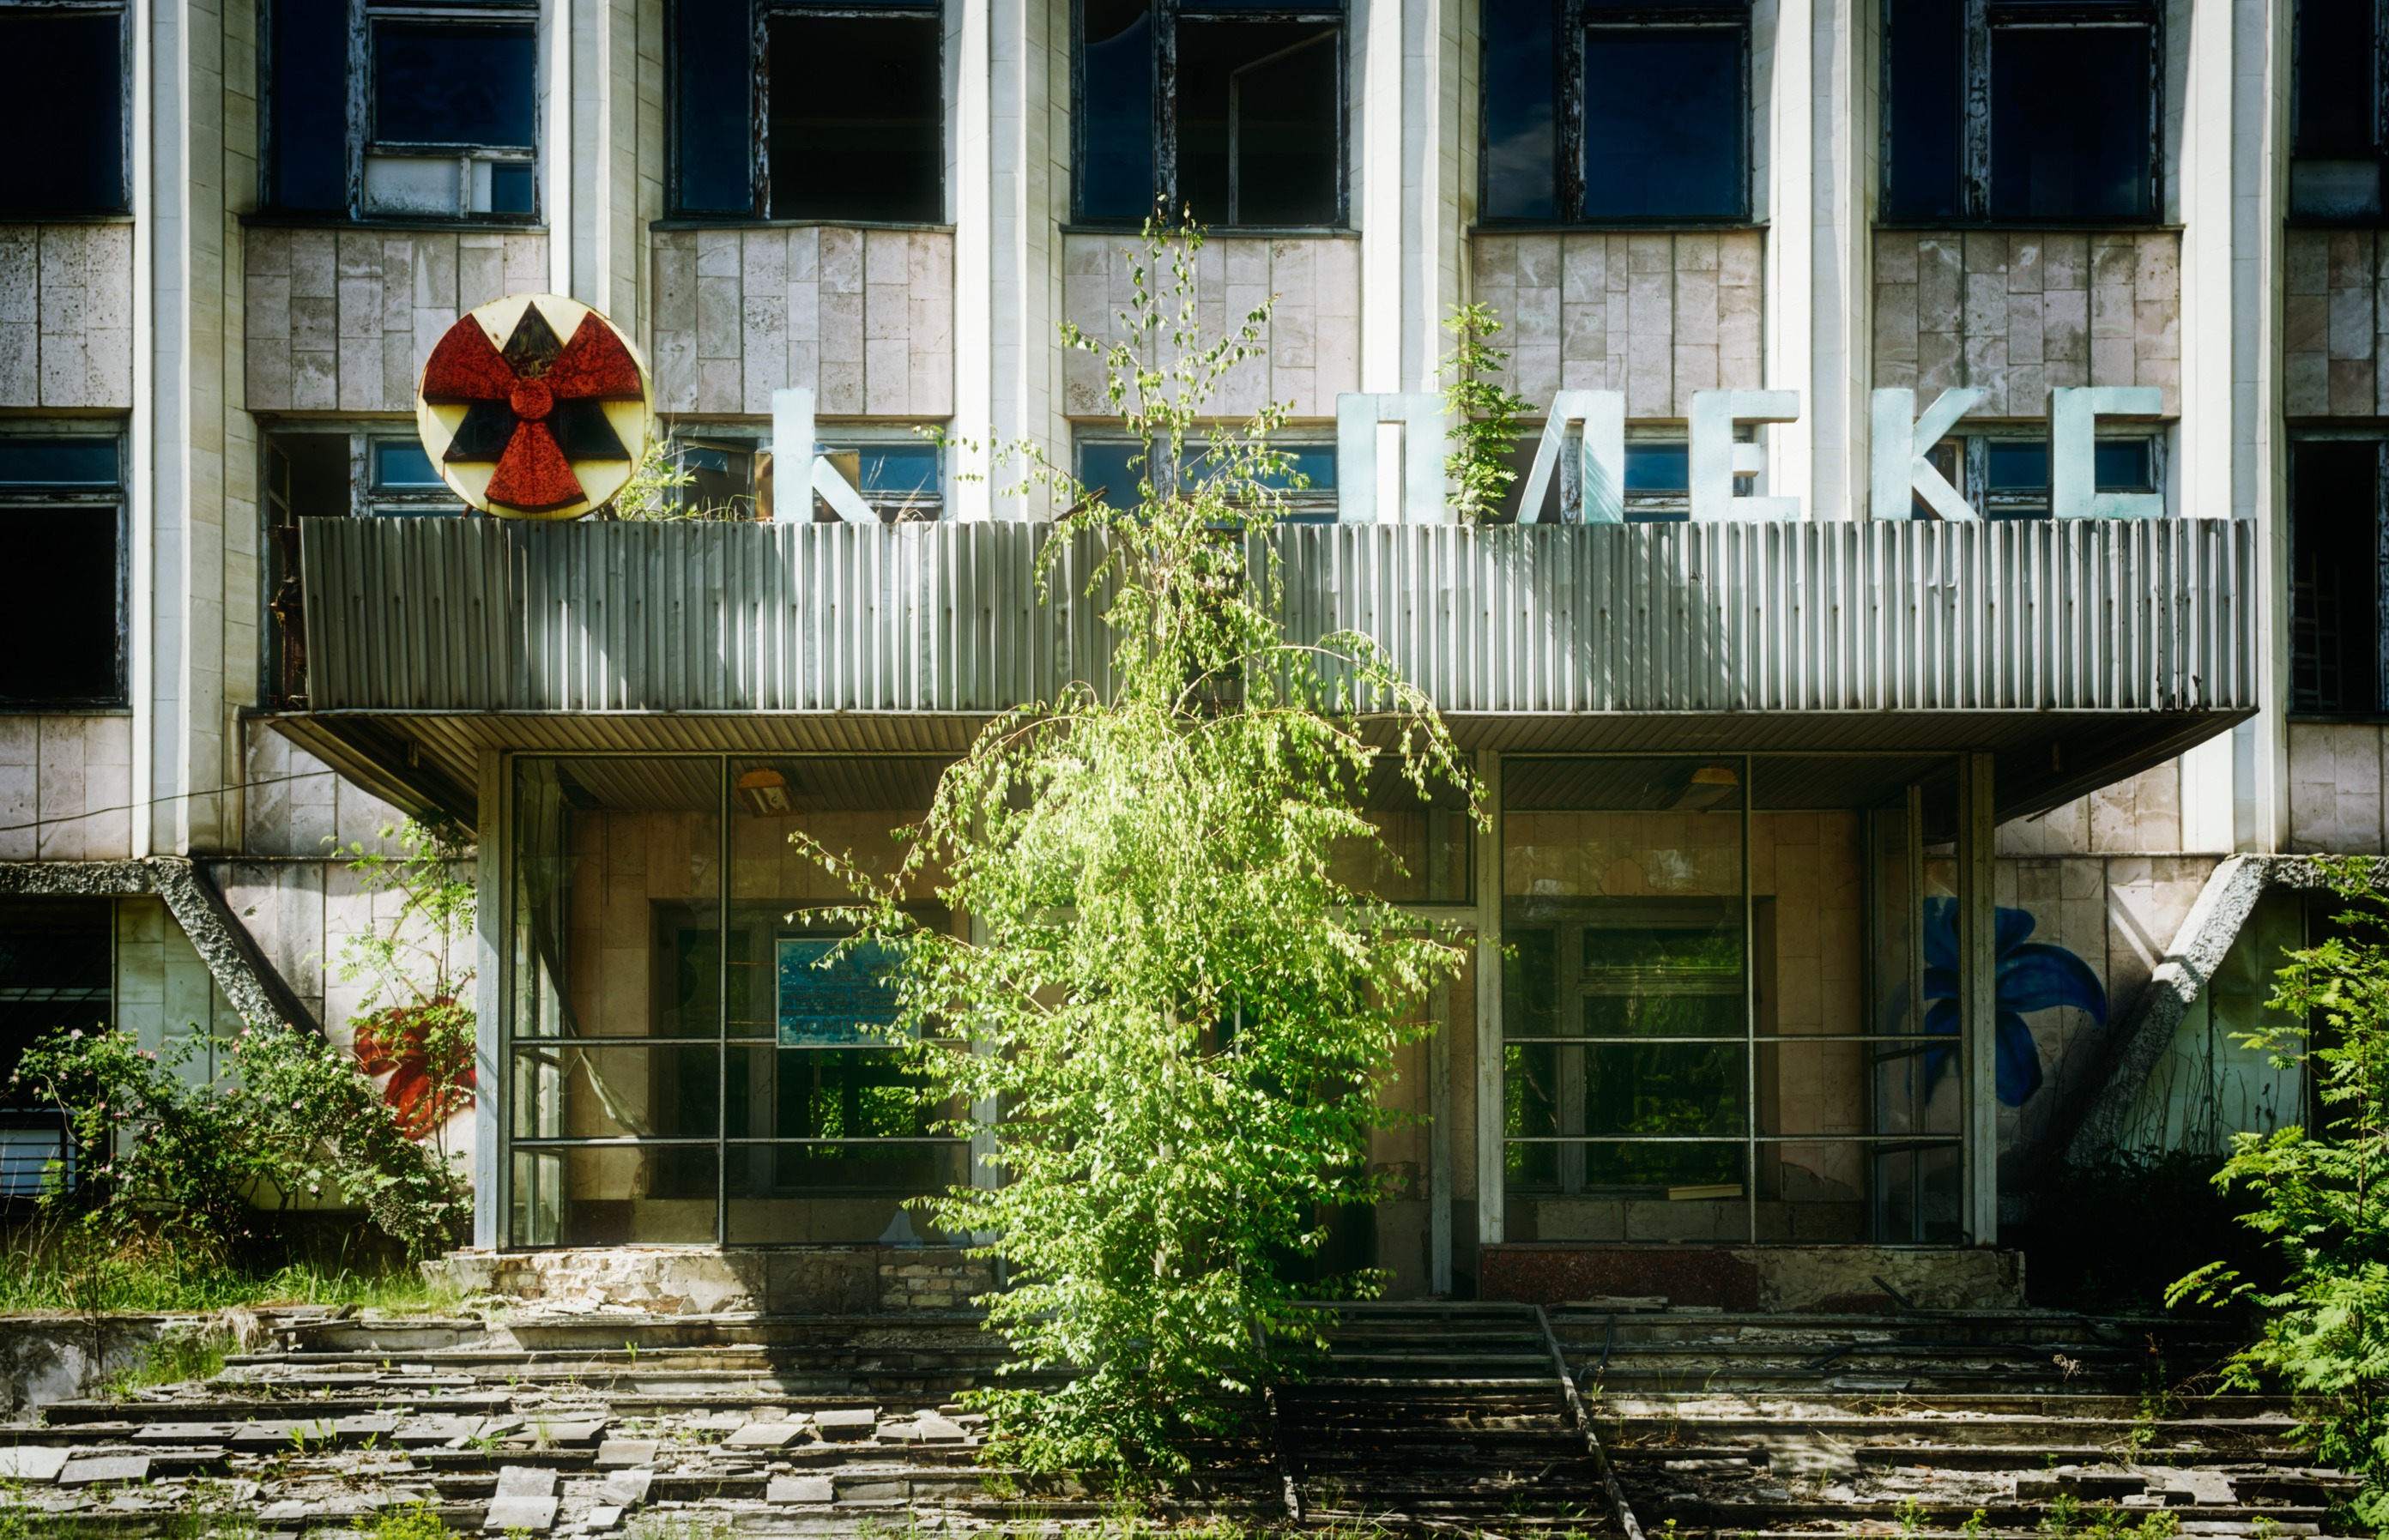 I think this is some sort of atomic center or office, it’s from the abandon city Pripyat, Ukraine.